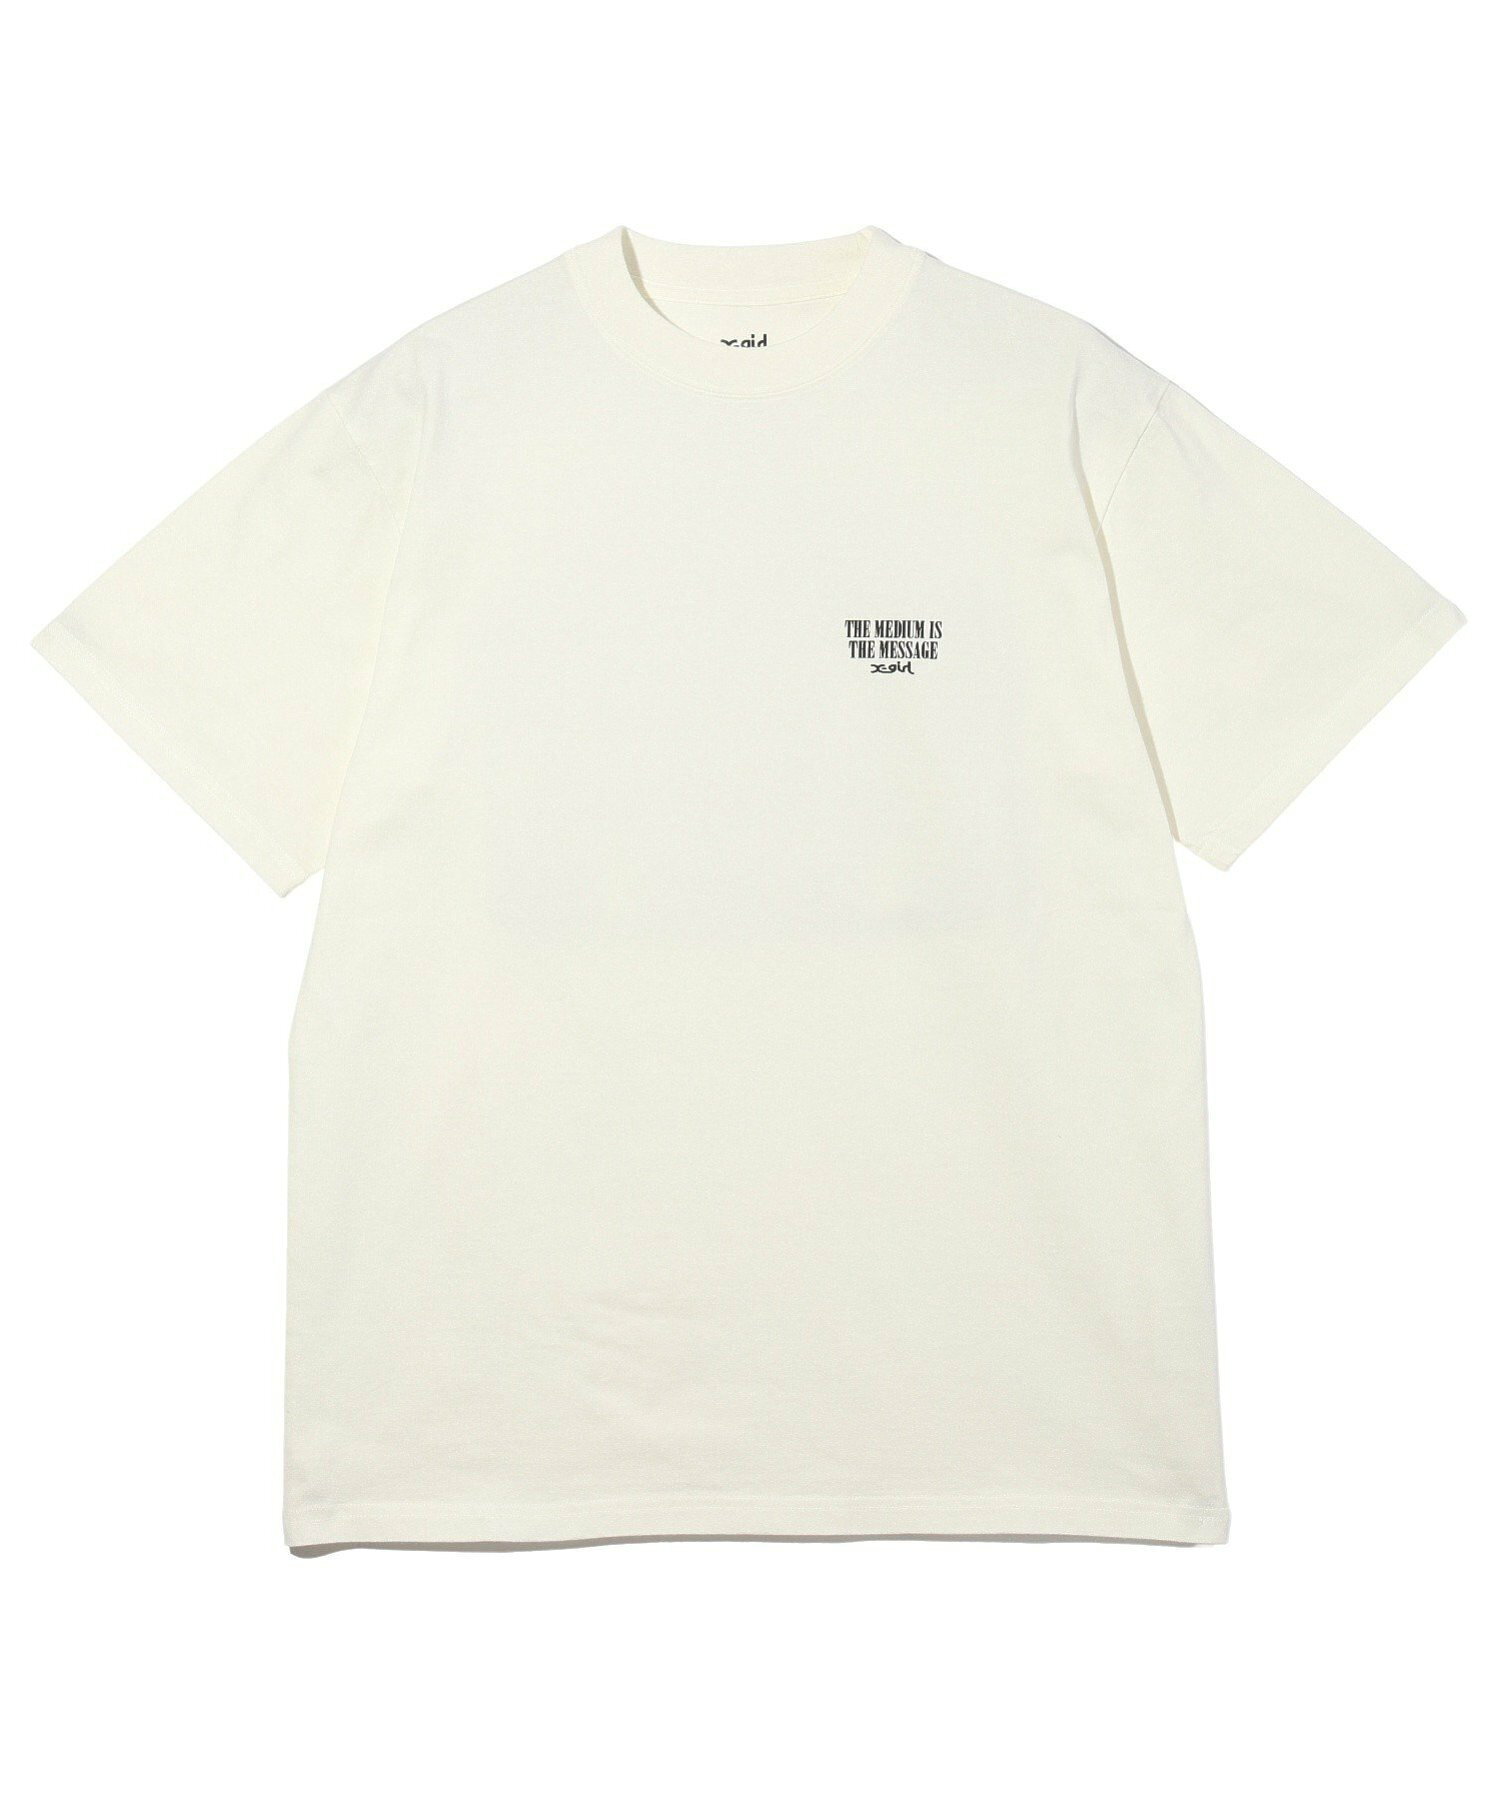 VINTAGE LABEL FACE LOGO S/S TEE Tシャツ X-girl